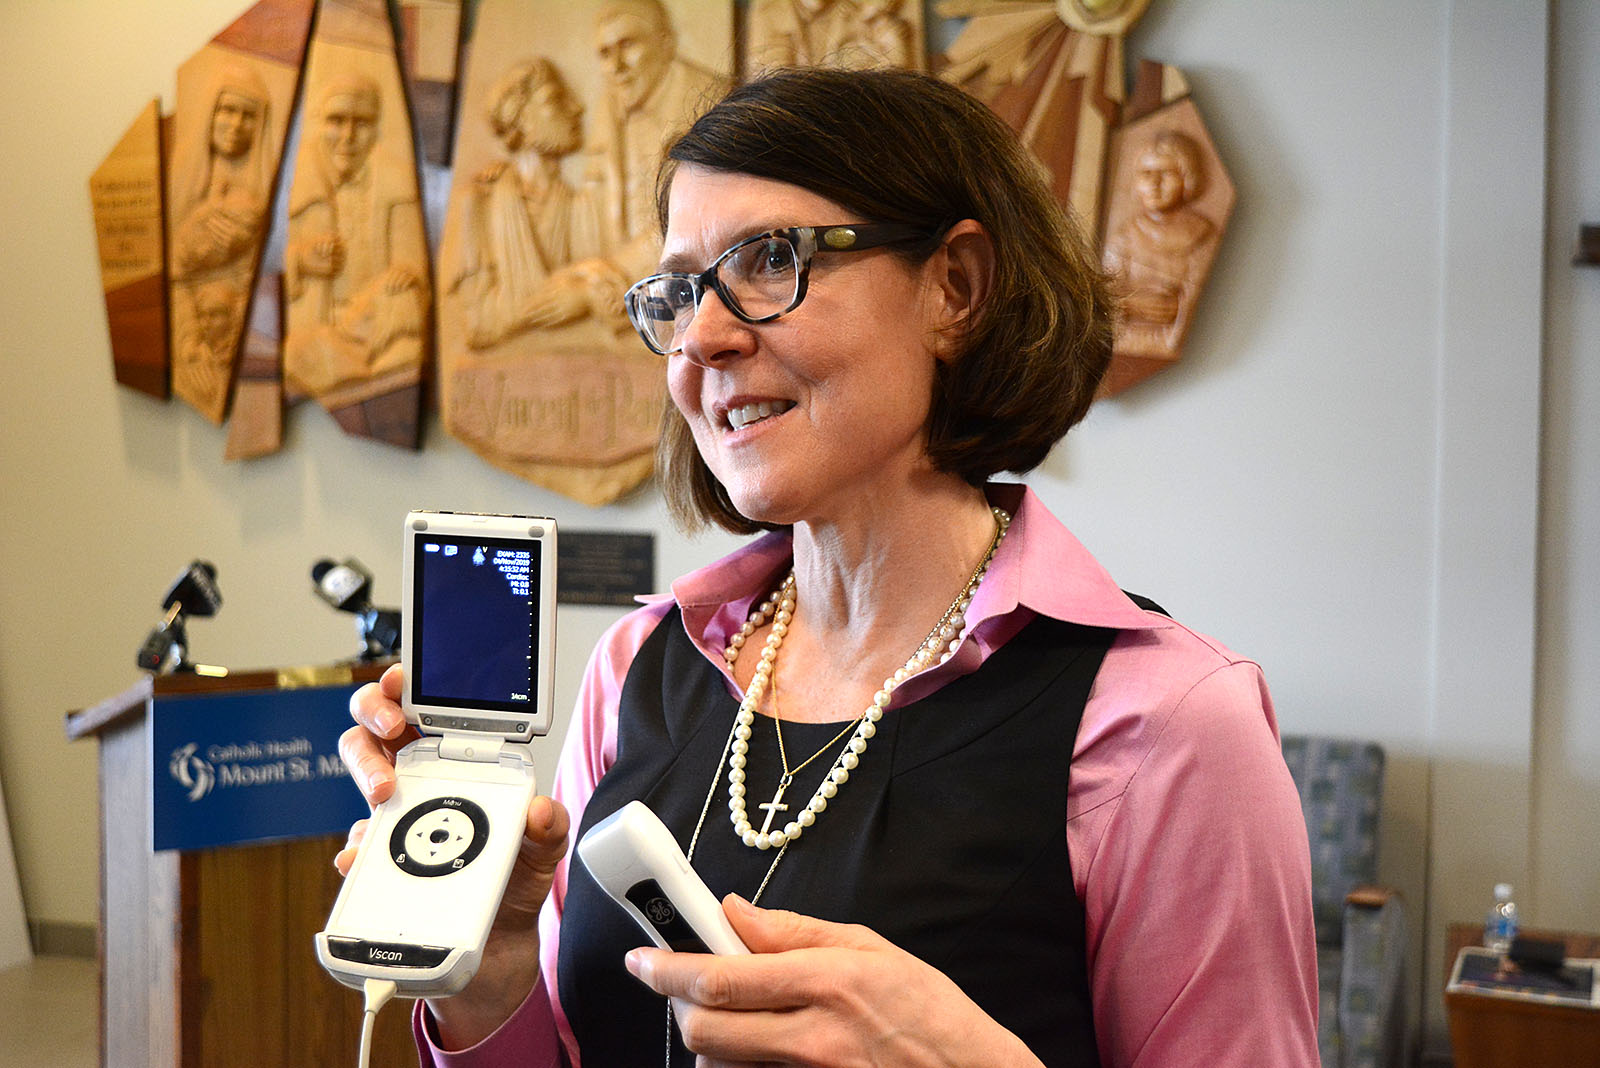 Patrick J. Buechi/Staff - Aimee Gomlak, vice president for Women's Health with Catholic Health, shows a hand-held ultrasound machine that was acquired by the Knights of Columbus and the diocesan Office of Pro-Life Activities. With the ability to detect a fetal heartbeat at six weeks, these small devices have been an asset to health care workers. 